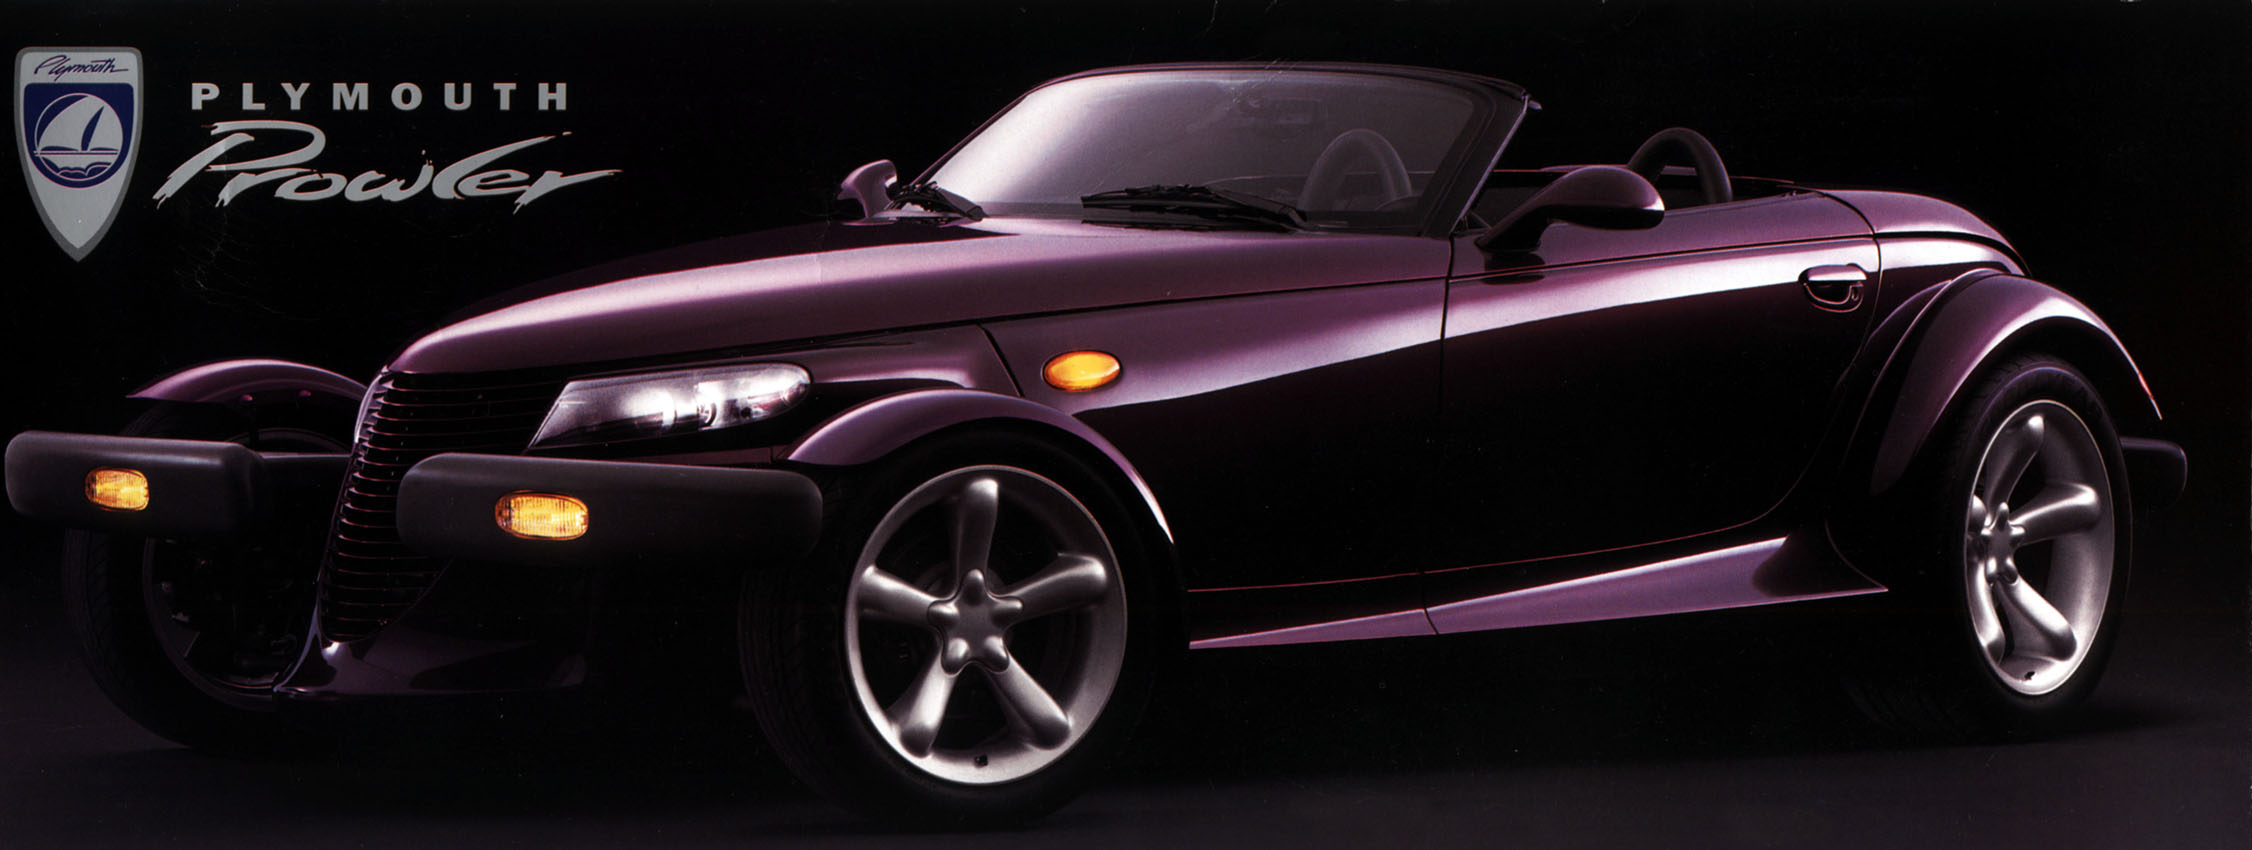 1997_Plymouth_Prowler-01